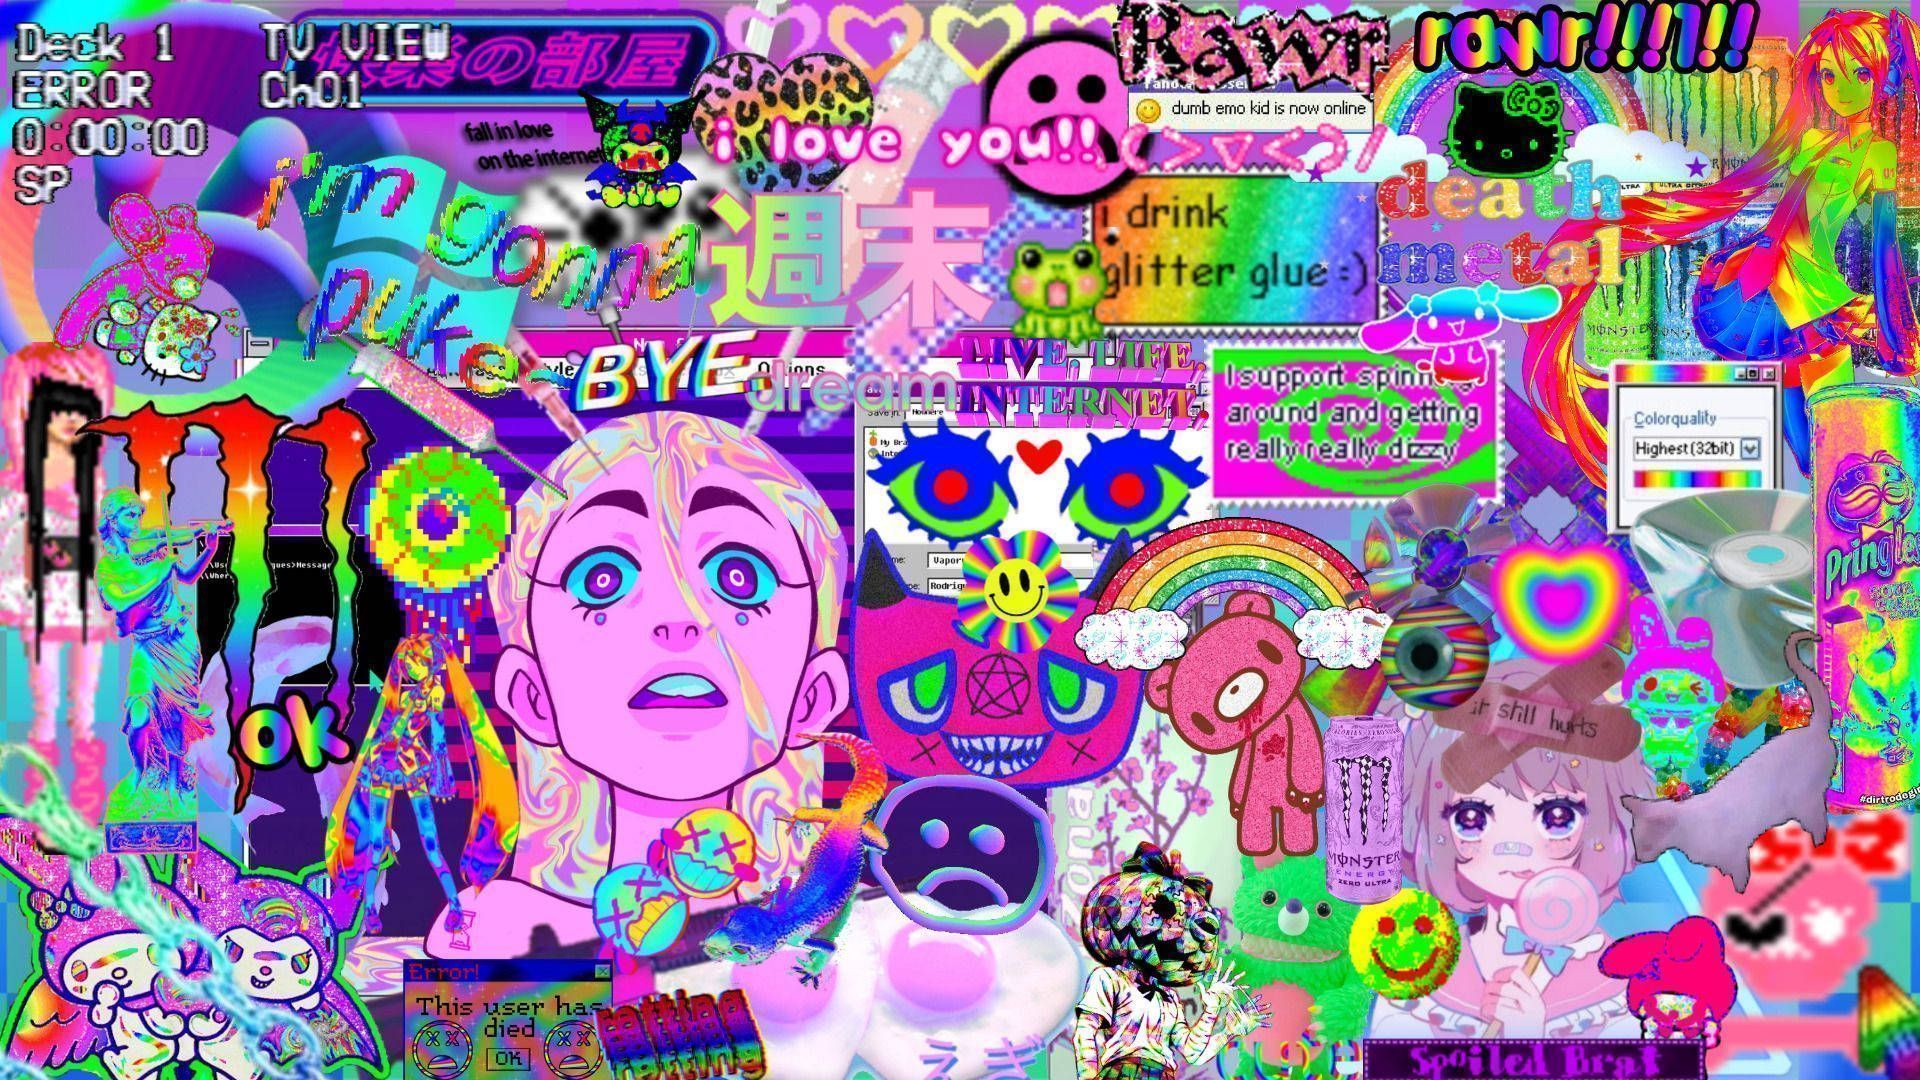 A collage of pictures with different colors - Glitchcore, webcore, weirdcore, traumacore